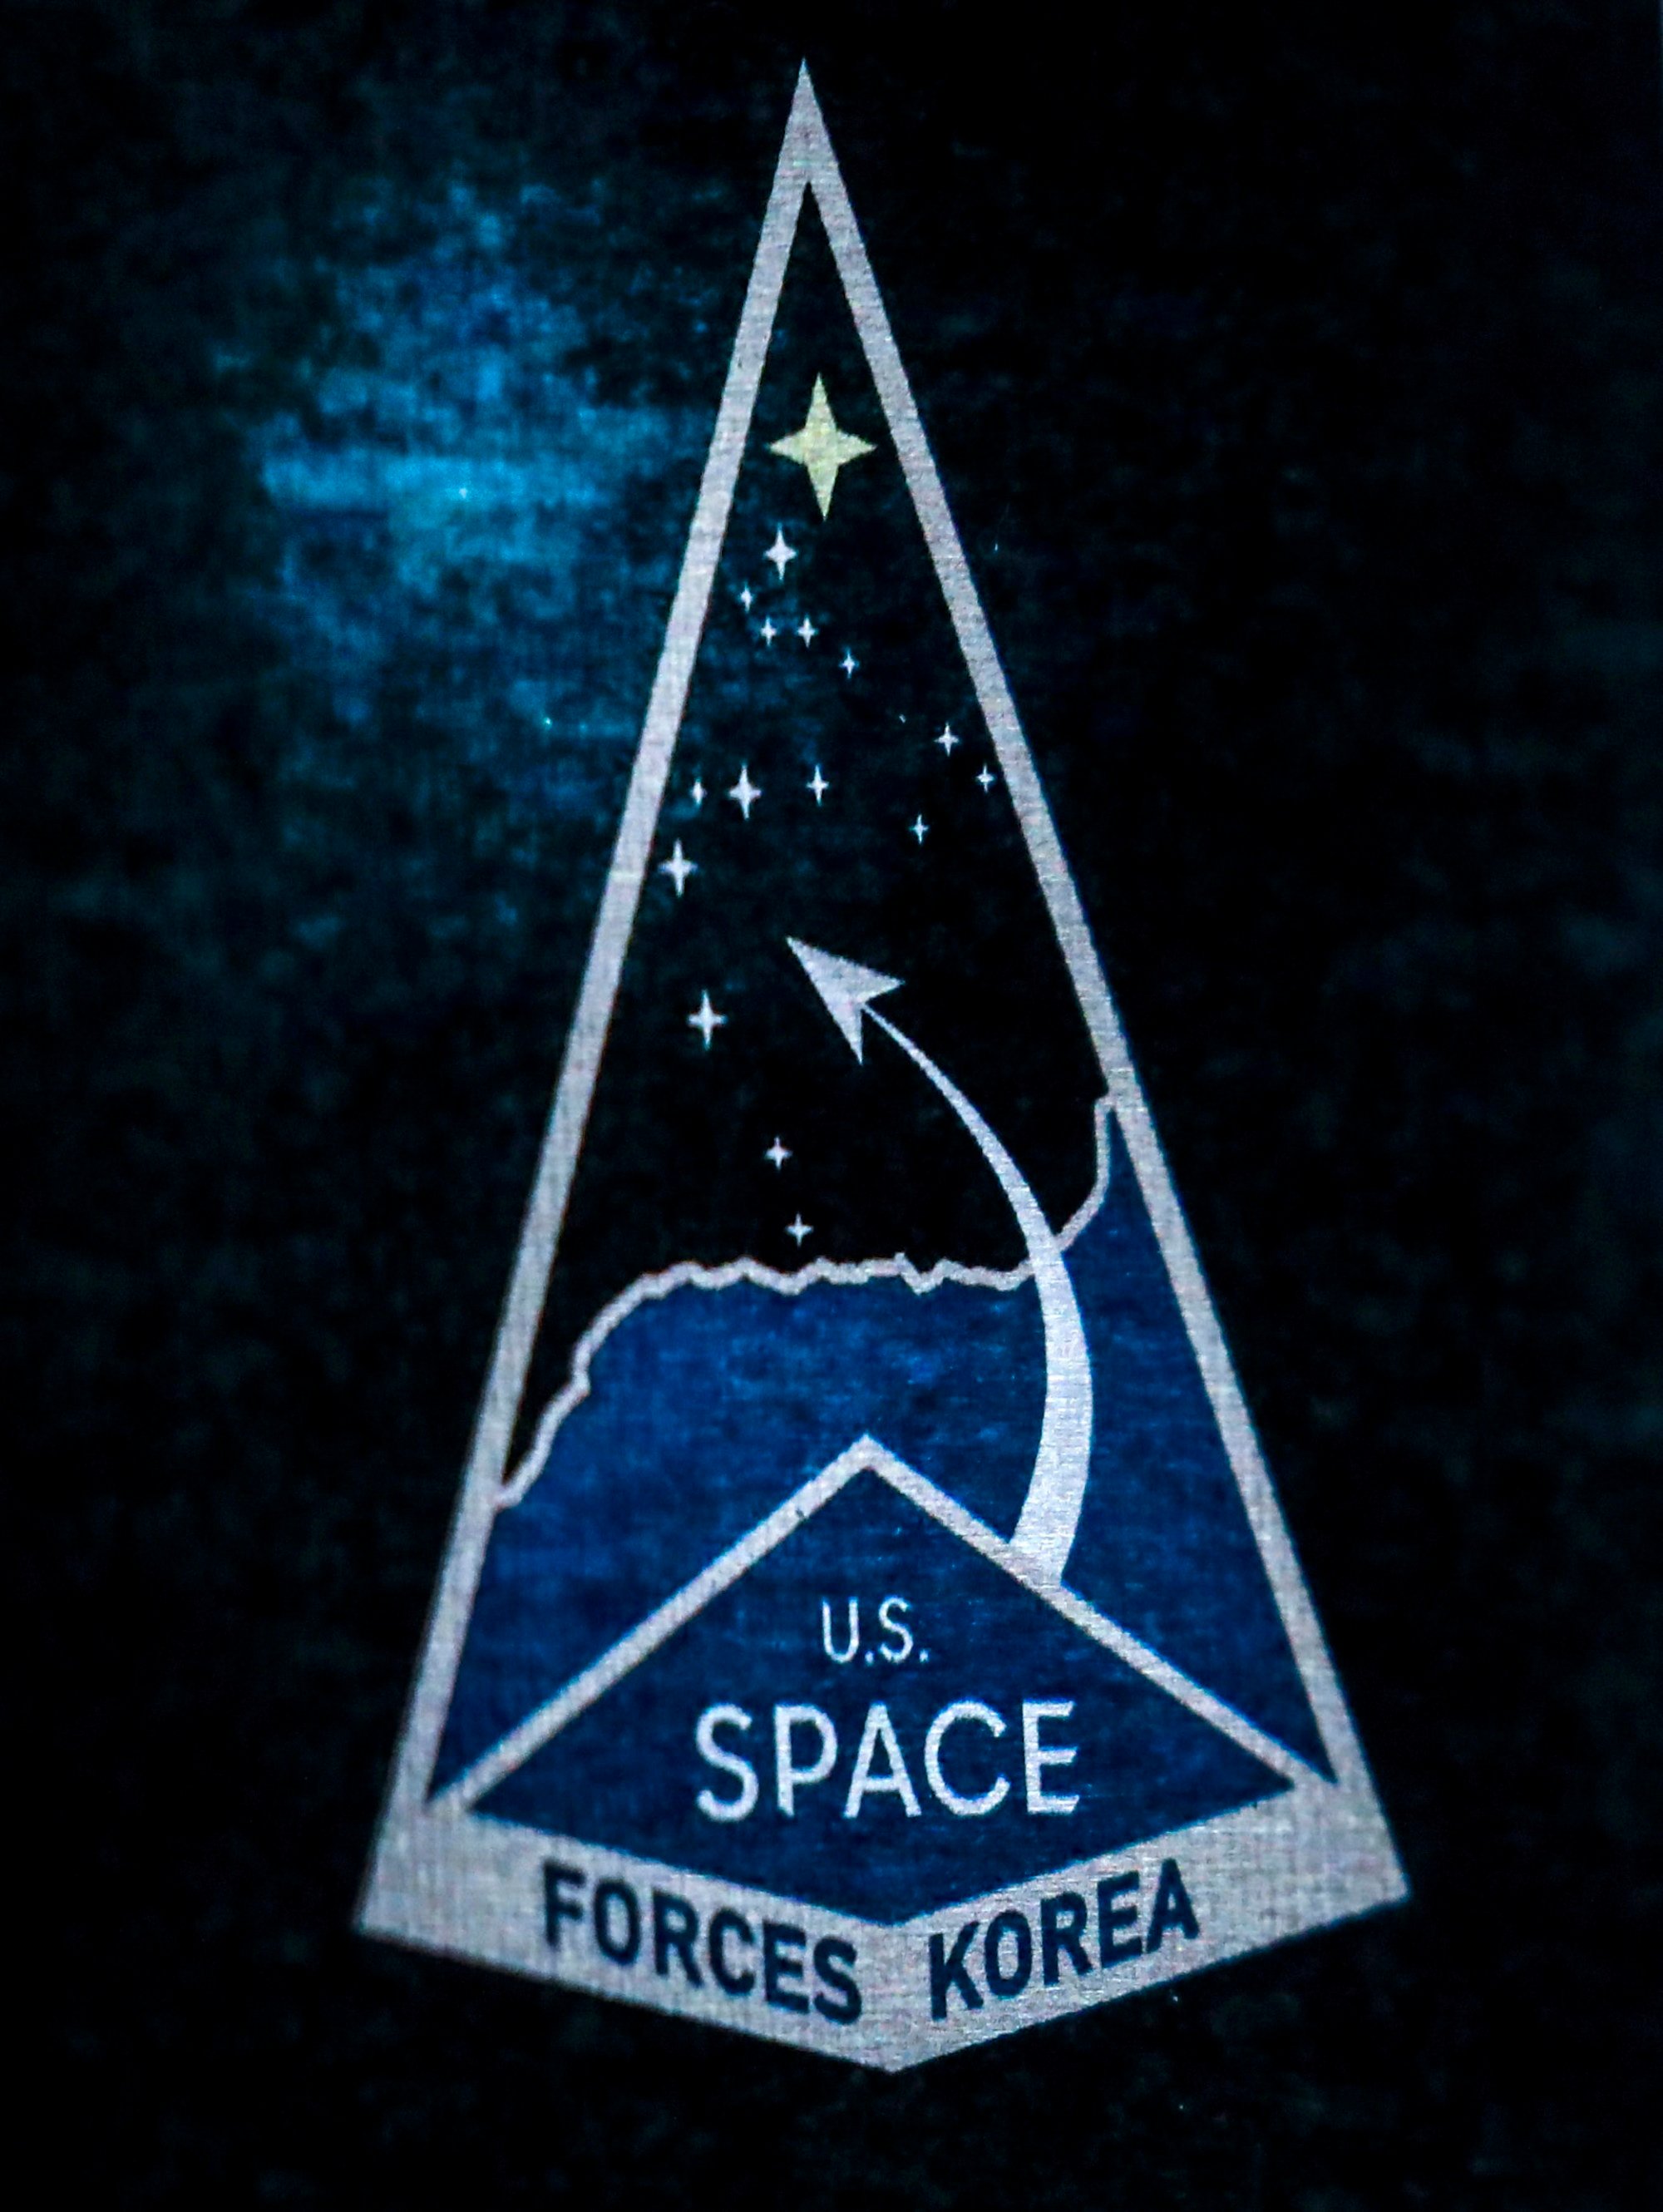 The insignia of the US Space Force unit in South Korea. Photo: EPA-EFE